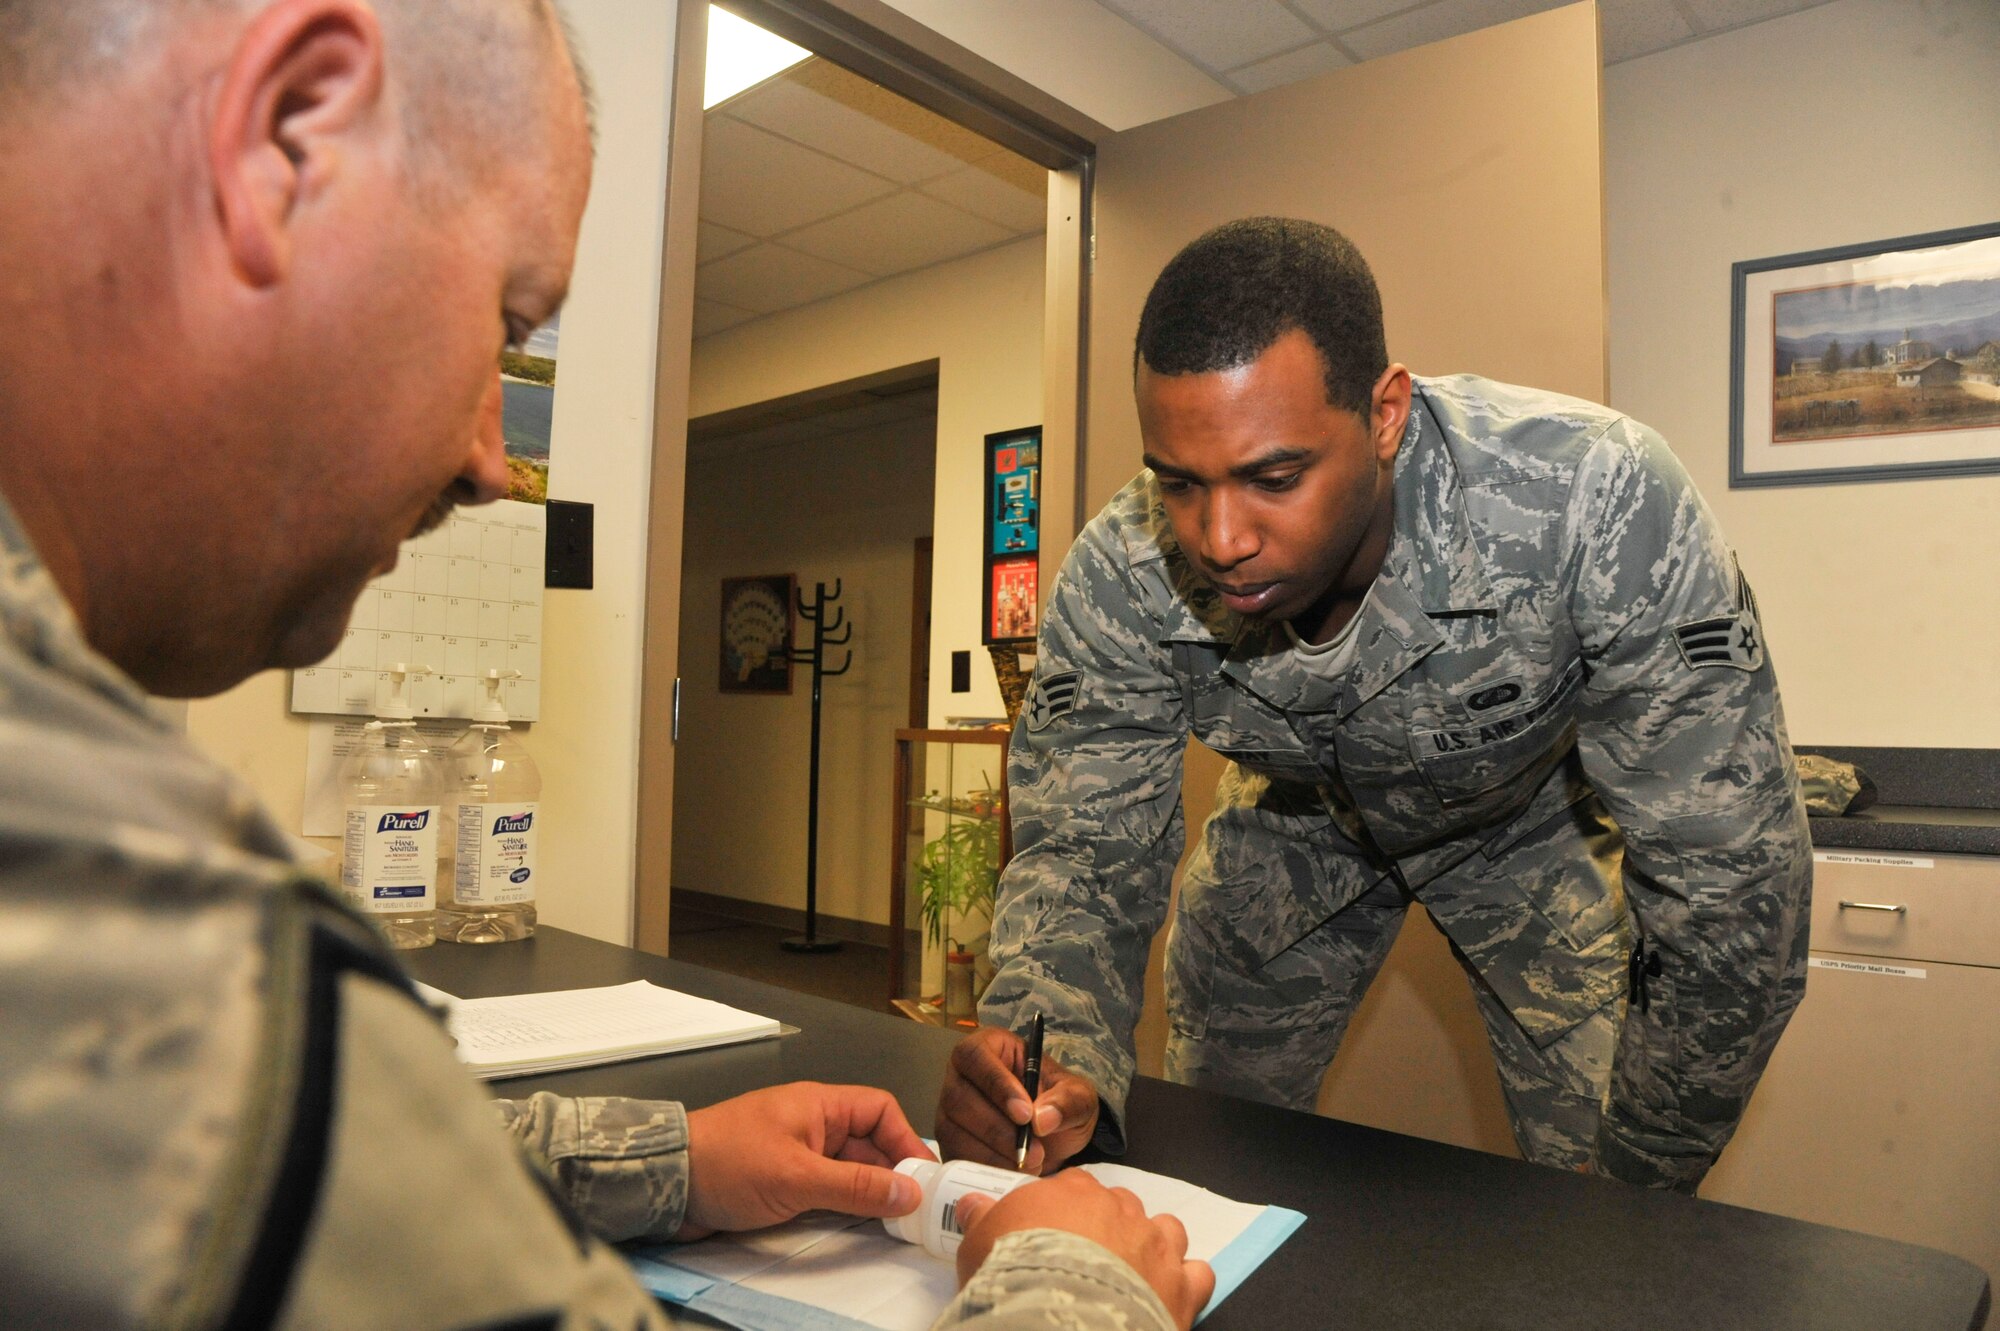 U.S. Air Force Senior Airman Bryon Caraway, 509th Comptroller Squadron finance specialists, initials a specimen bottle while Master Sgt. Todd Schafer, 509th Bomb Wing drug testing program administrative manager, observes at Whiteman Air Force Base, Mo., May 8, 2014. This procedure is done to confirm the sample belongs to the member. (U.S. Air Force photo by Airman 1st Class Keenan Berry/Released)